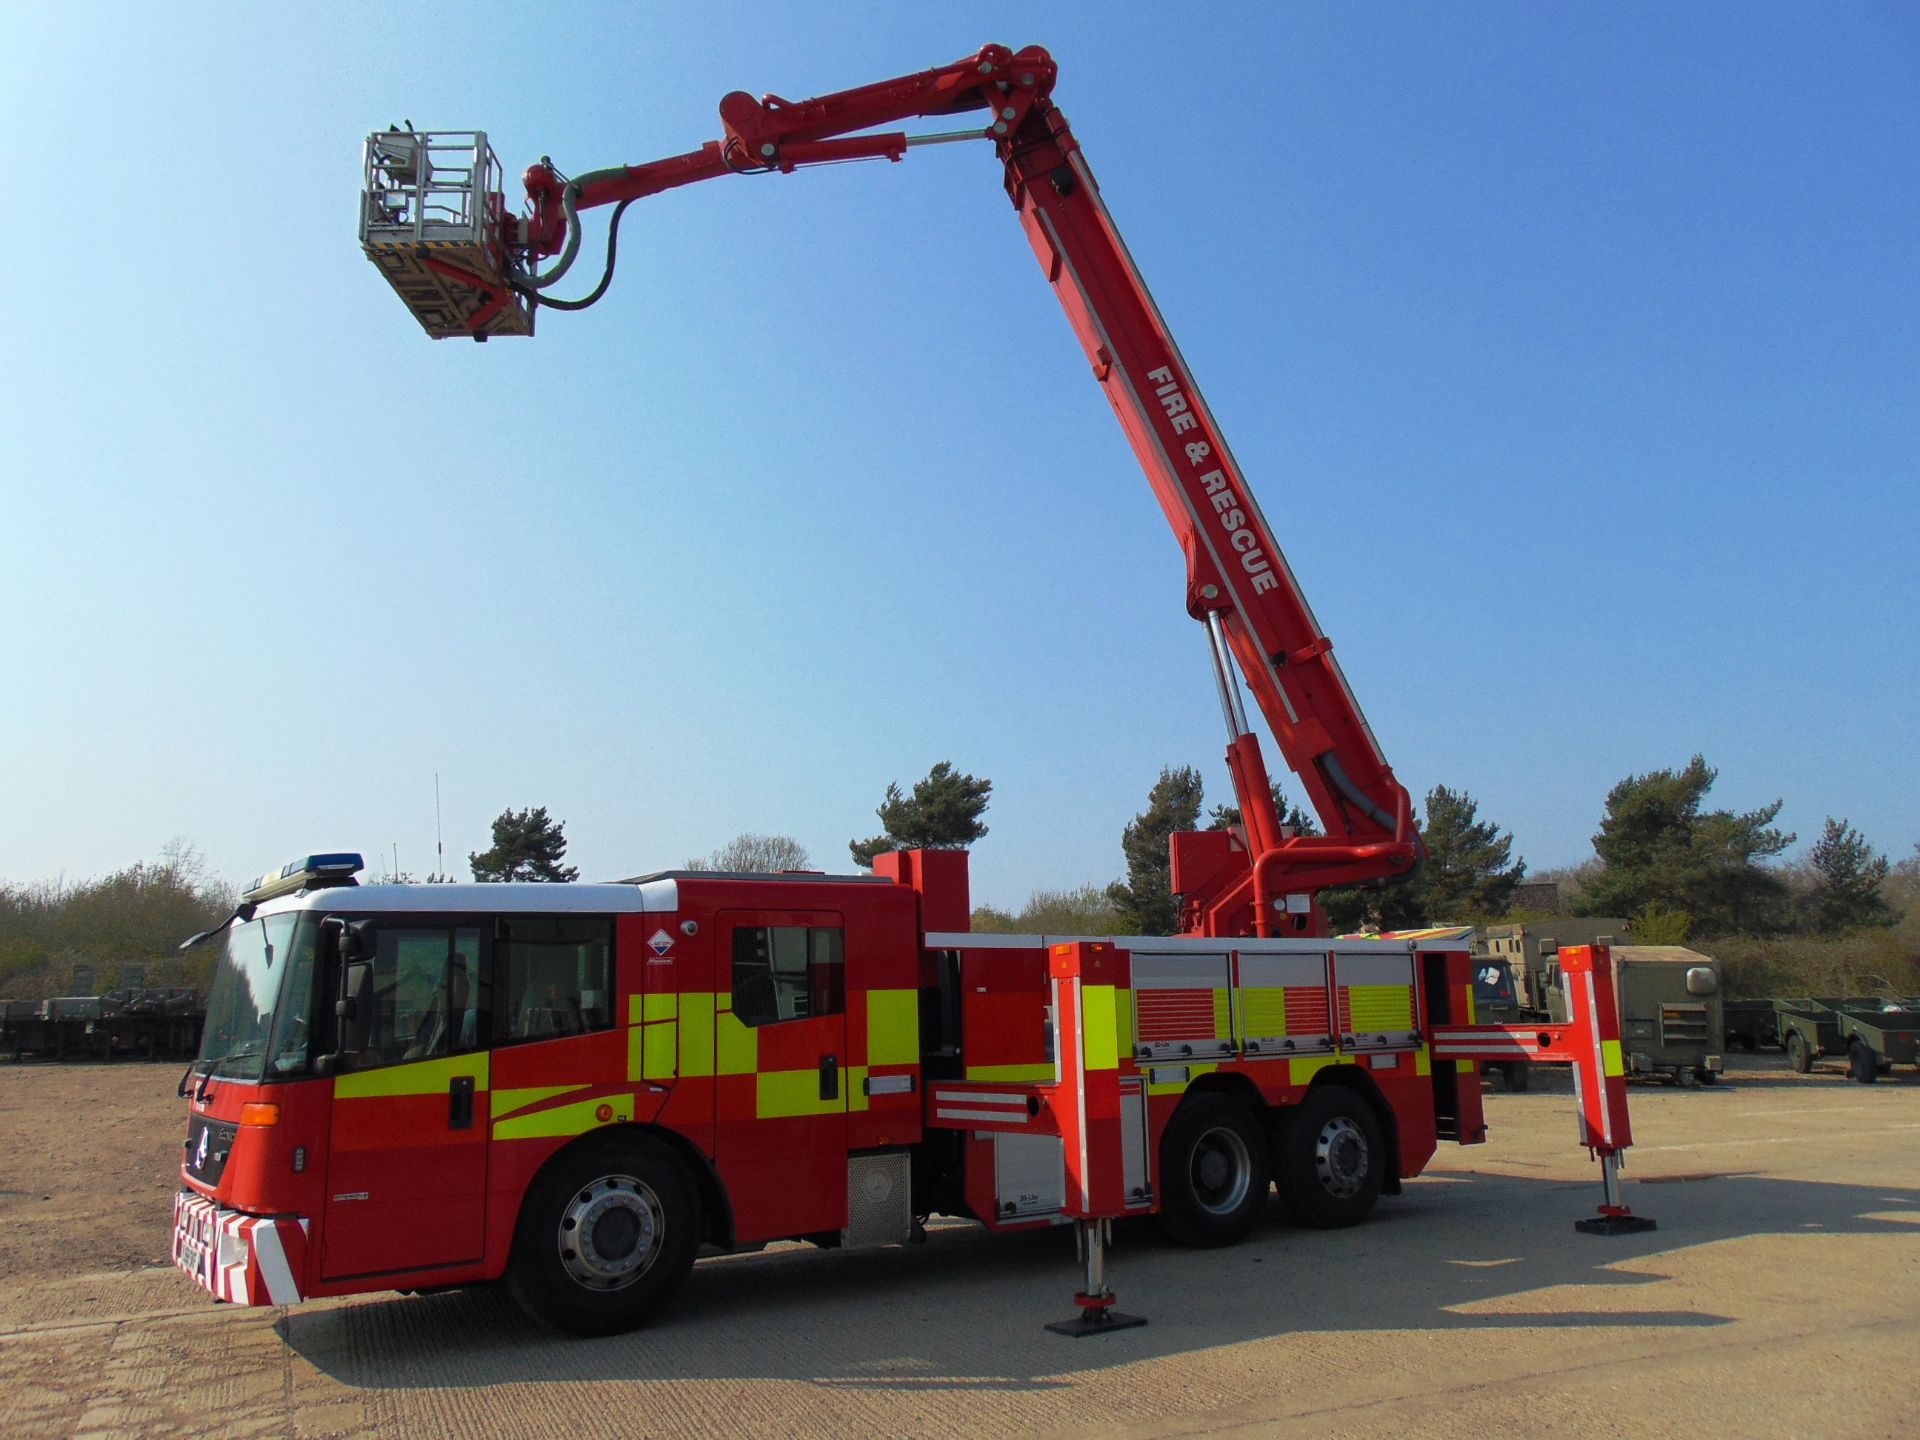 2008 Mercedes Econic CARP (Combined Aerial Rescue Pump) 6x2 Aerial Work Platform / Fire Appliance - Image 11 of 49